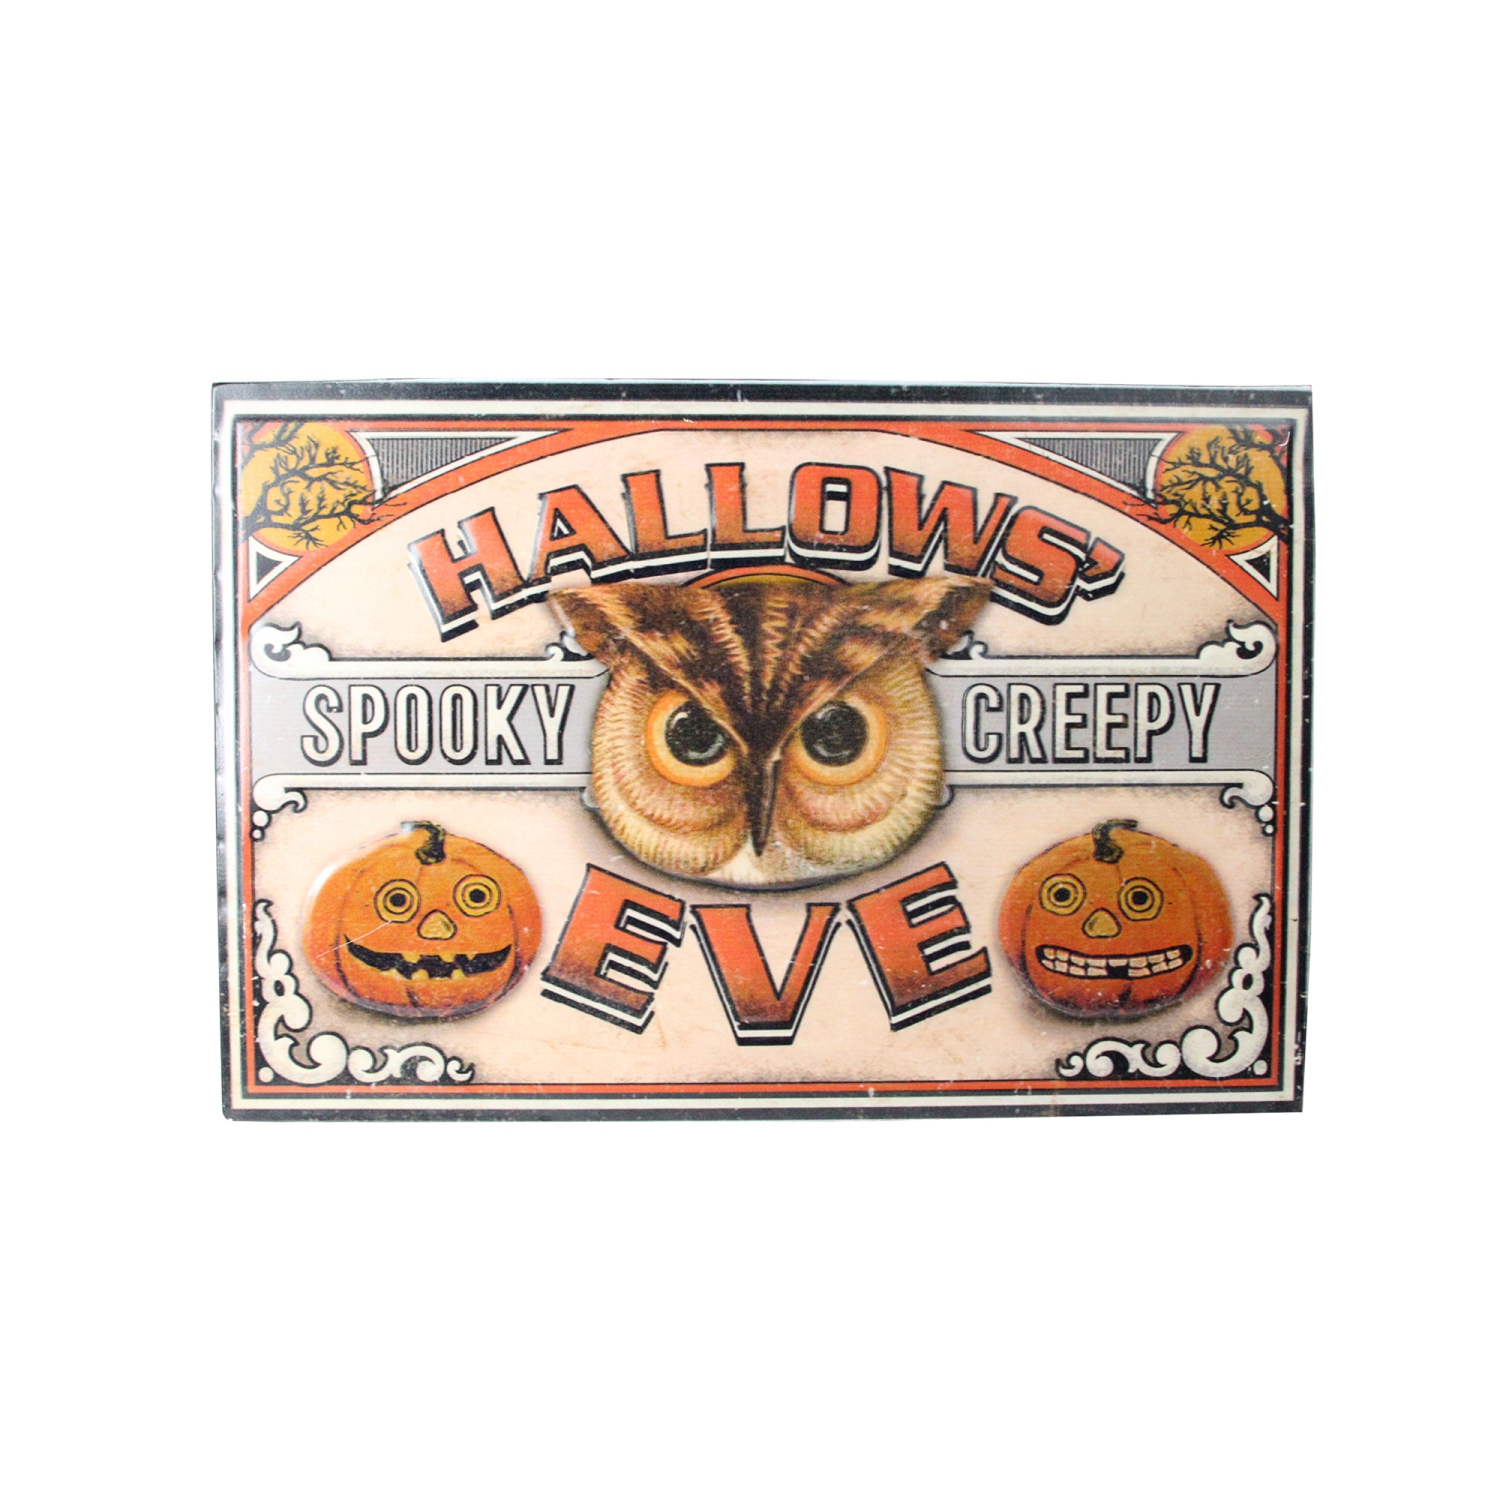 Orange and Black Stamped “HALLOWS' EVE" Wall Art 12.25" x 18"